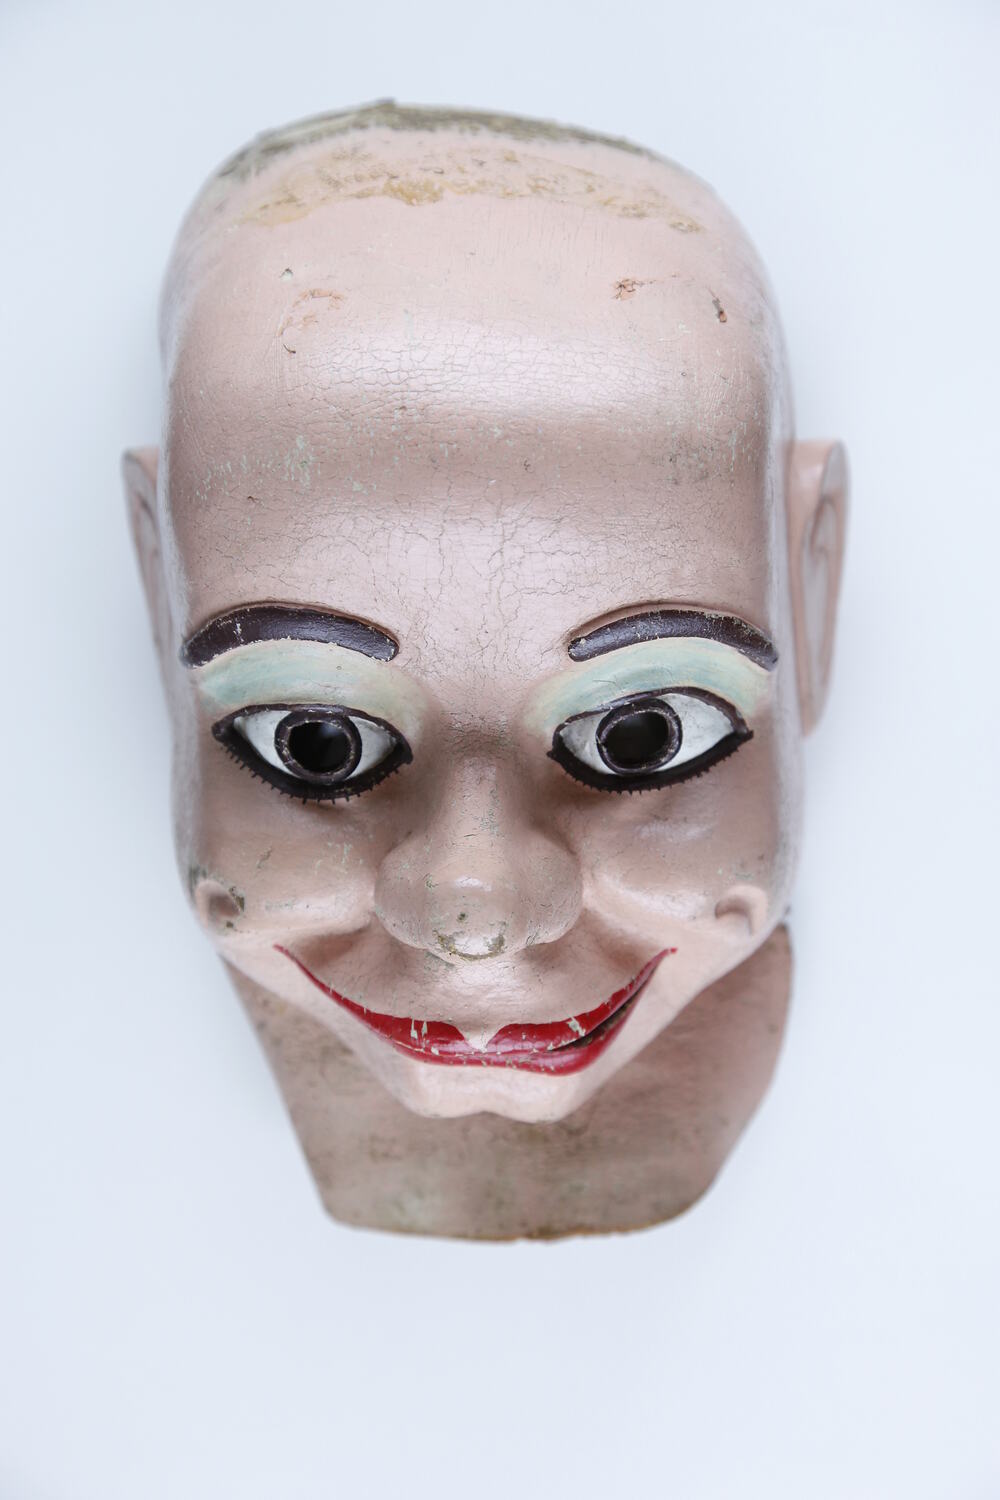 Mask - GTV Channel 9, Gerry Gee, Rubber, Melbourne, circa 1960